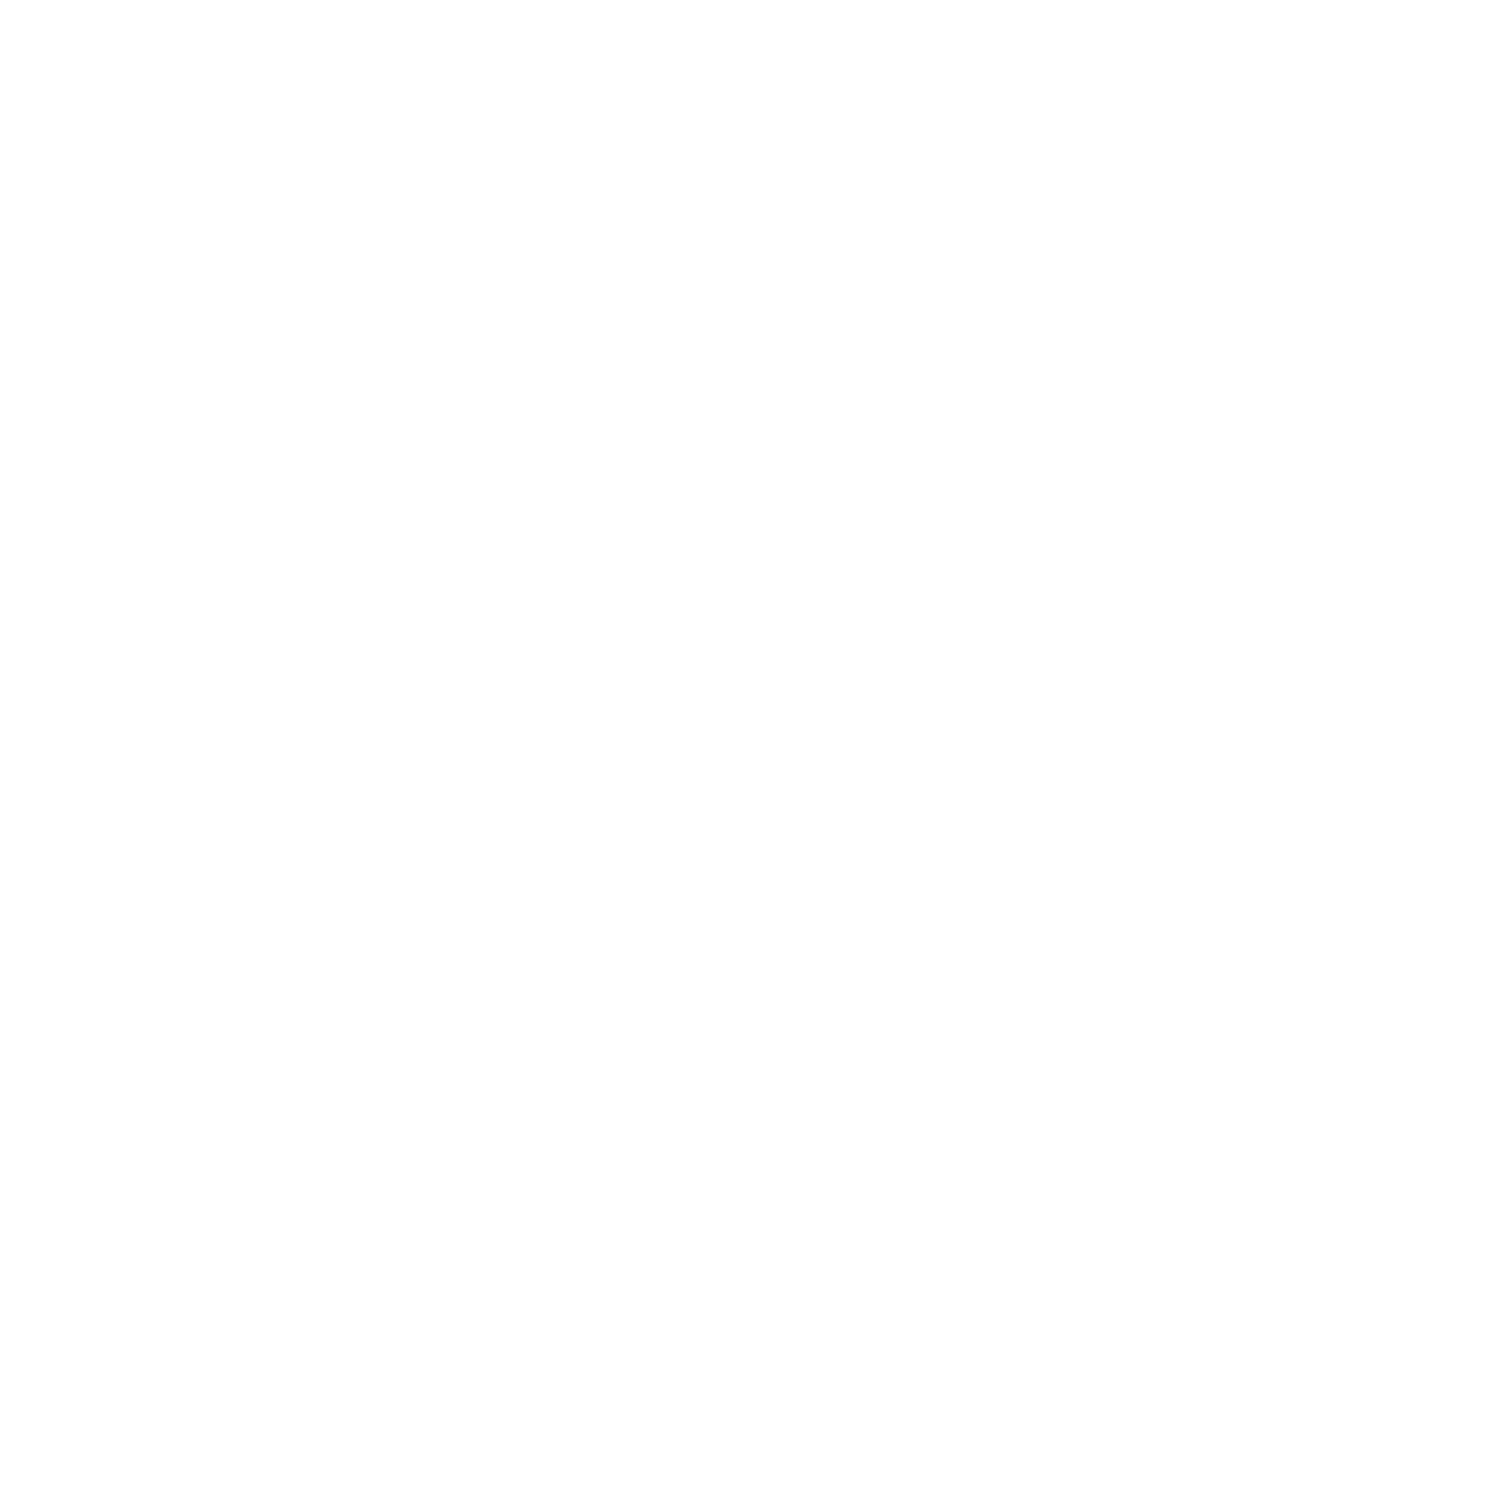 Caan Rose Estates Ltd - Slough : Letting agents in Feltham Greater London Hounslow